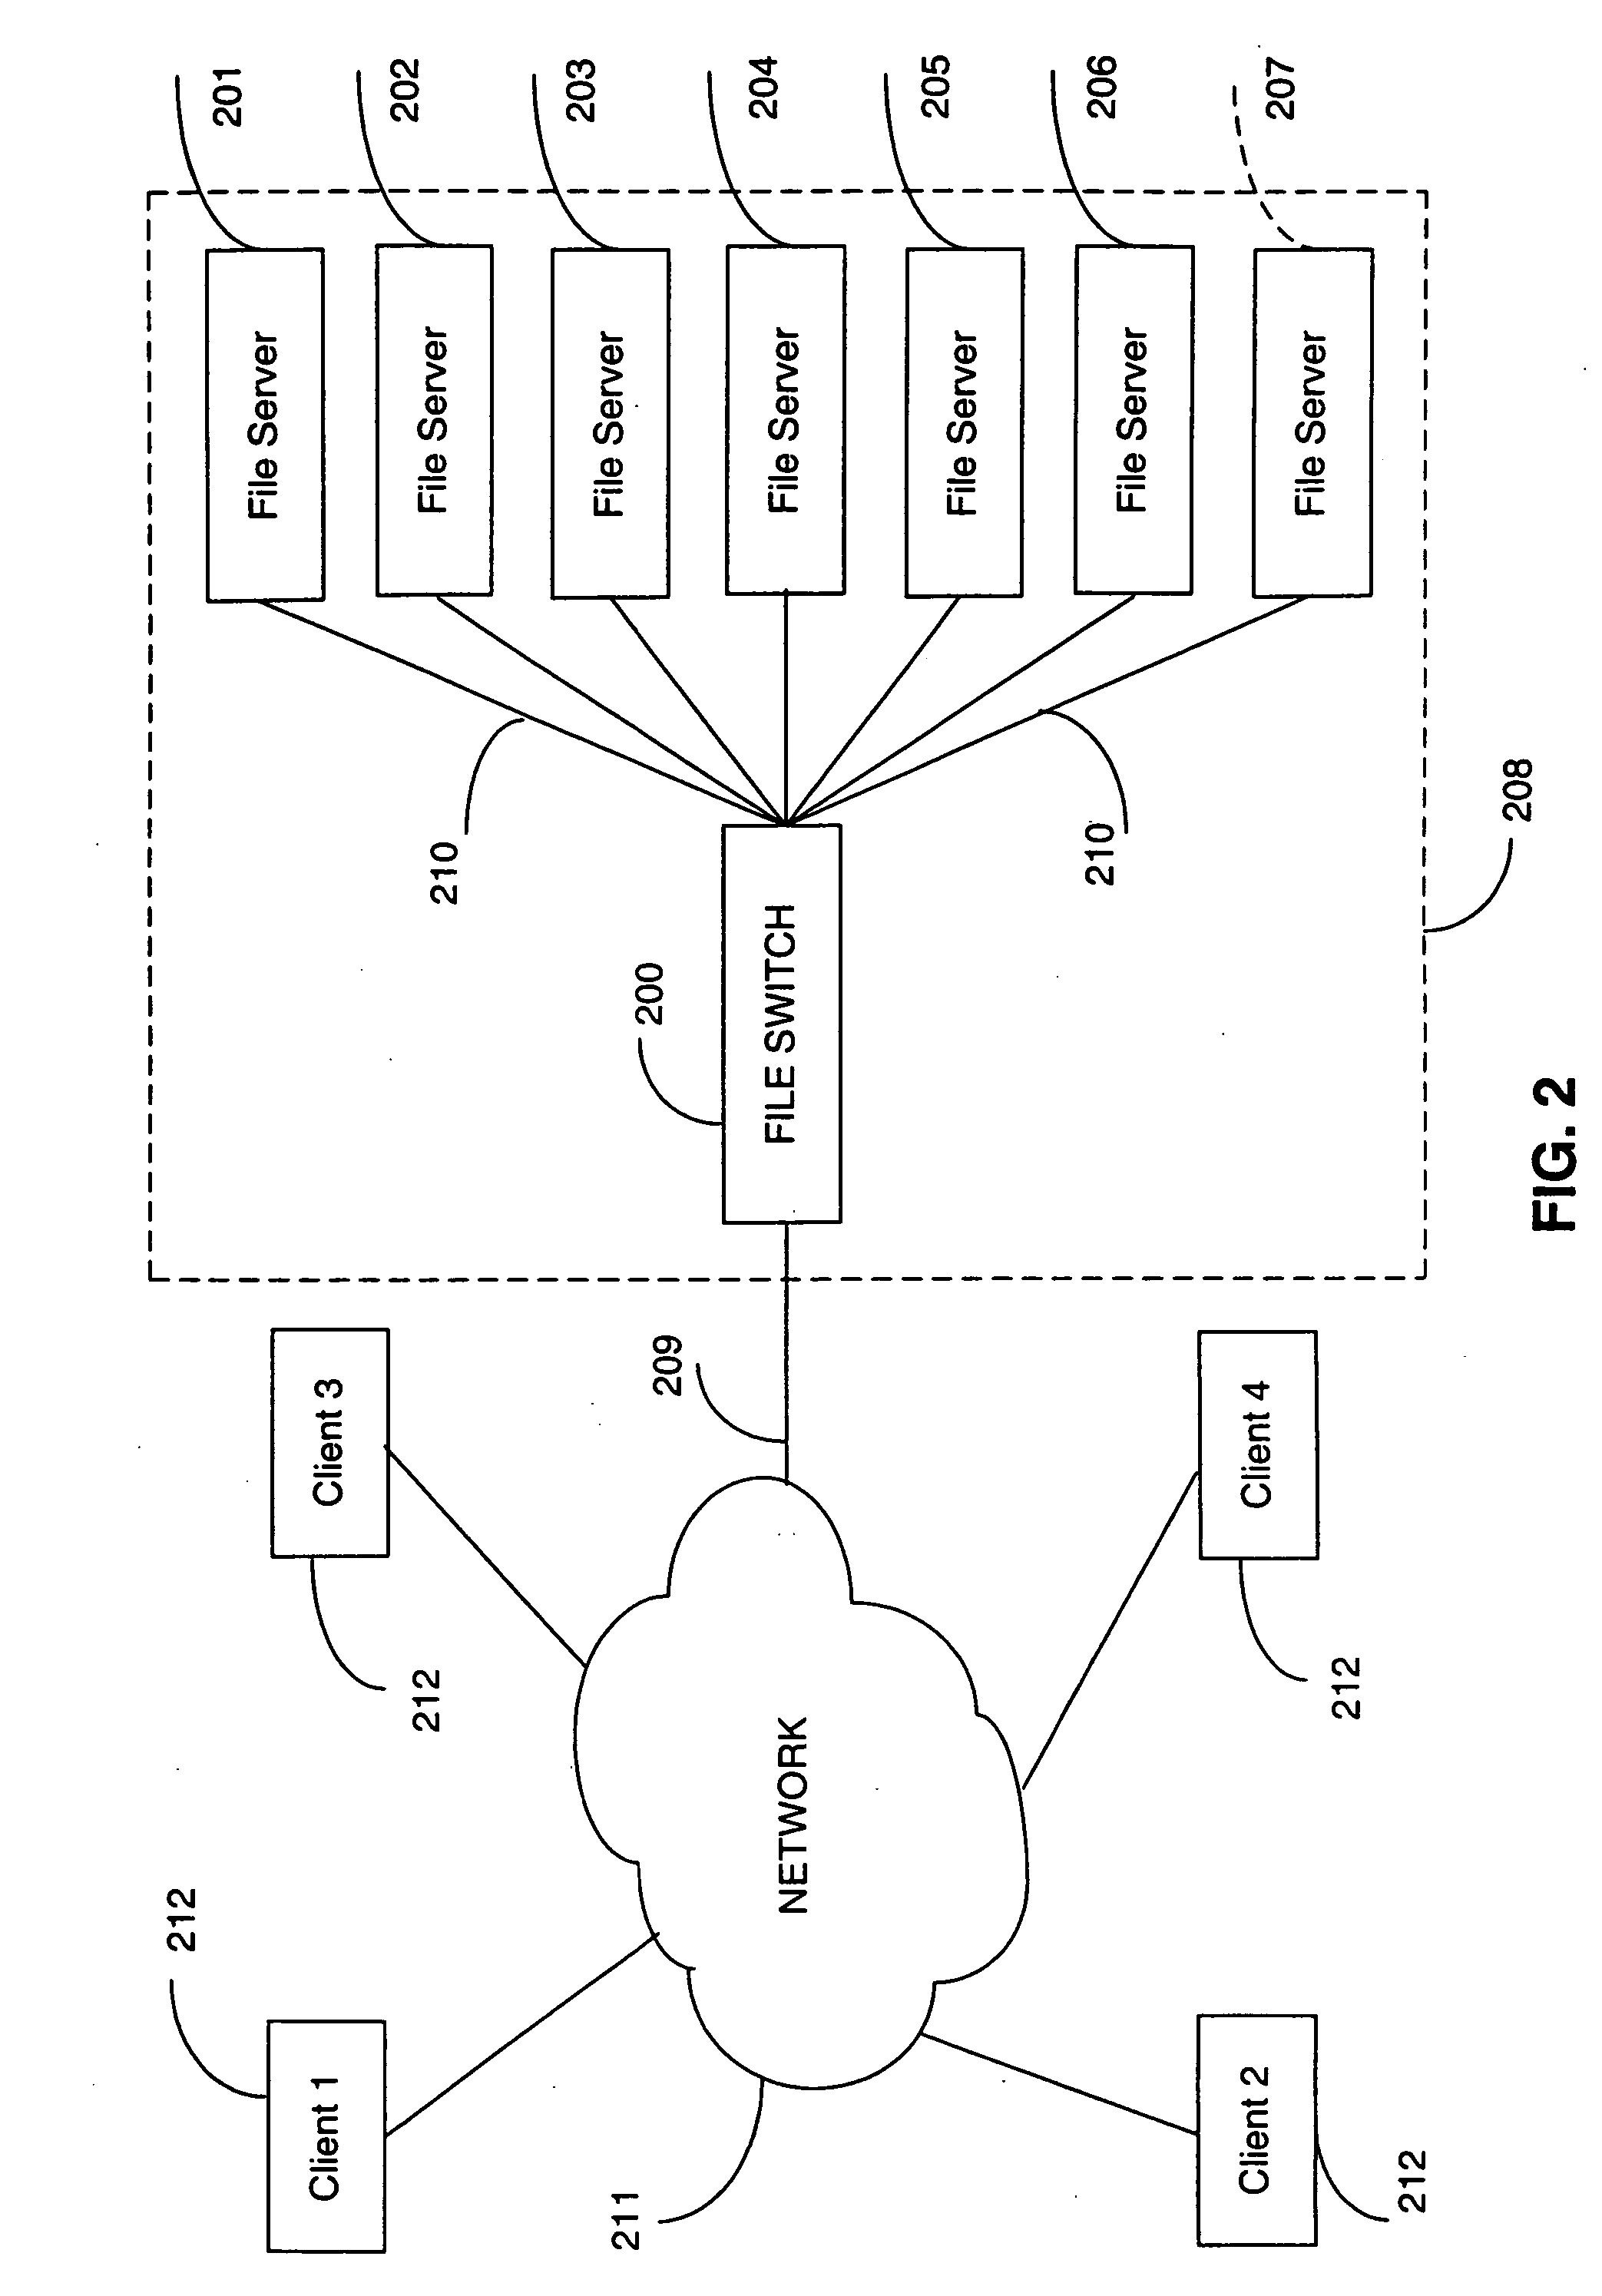 Directory aggregation for files distributed over a plurality of servers in a switched file system